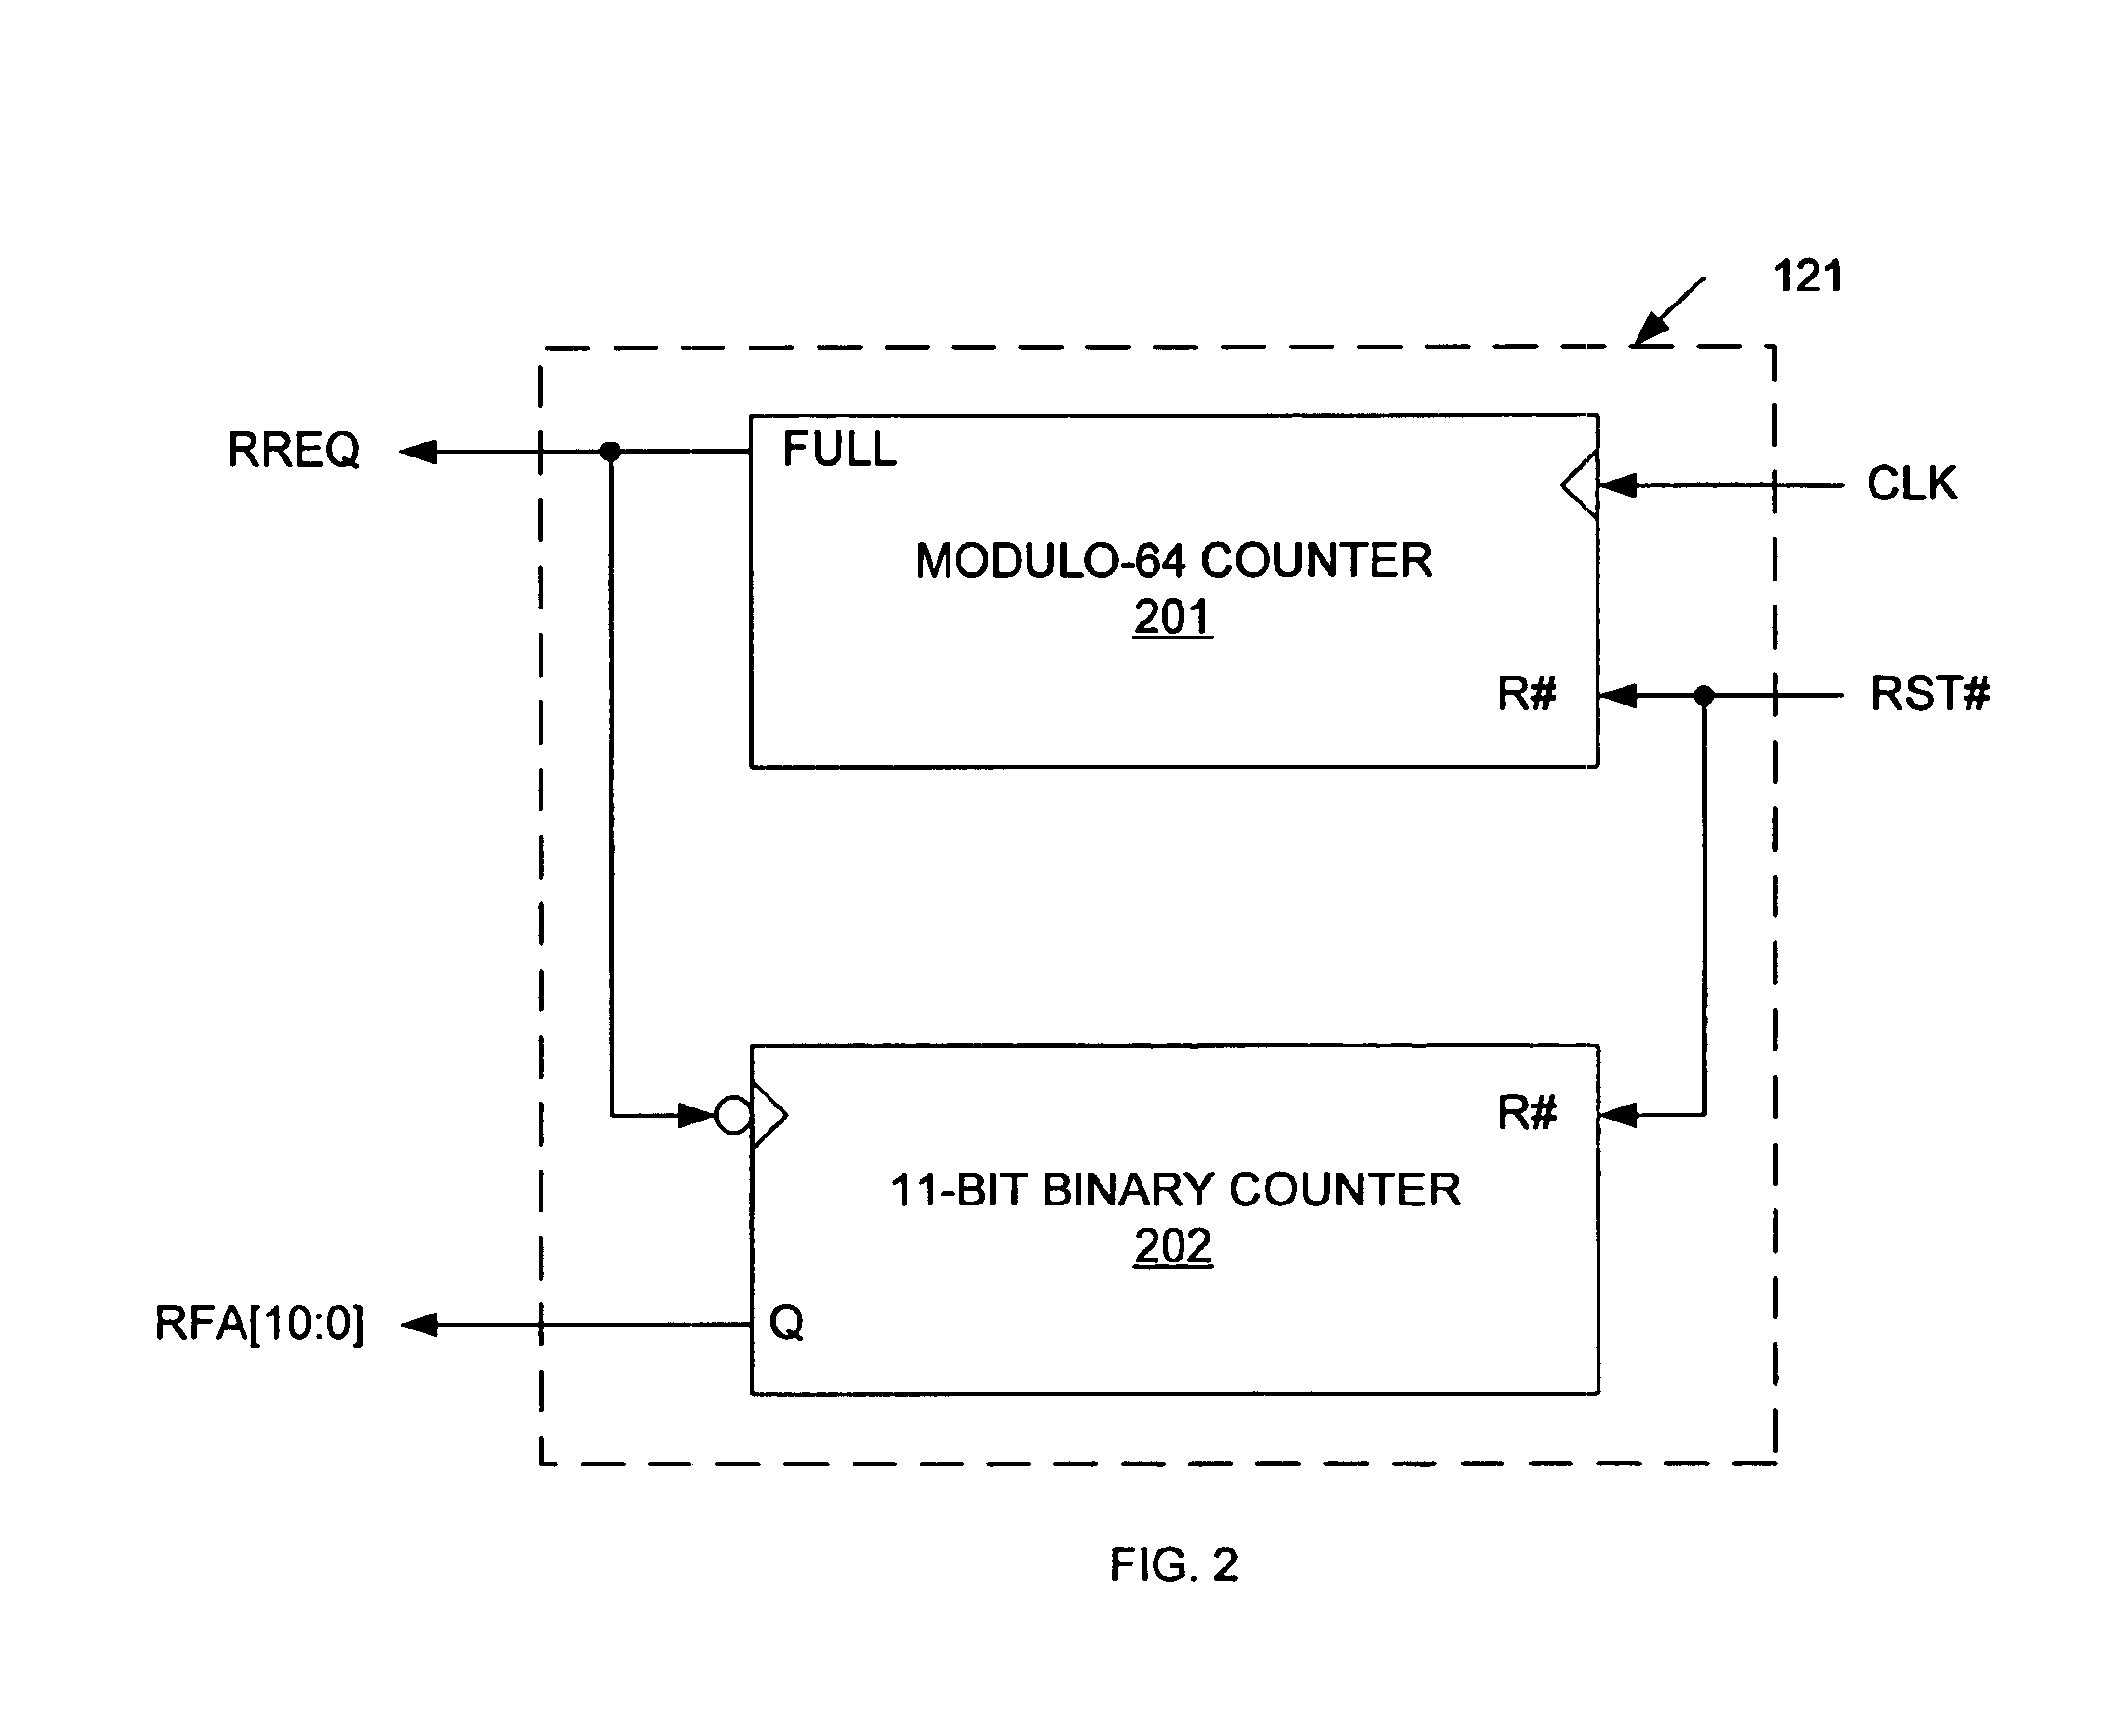 Method and apparatus for temperature adaptive refresh in 1T-SRAM compatible memory using the subthreshold characteristics of MOSFET transistors